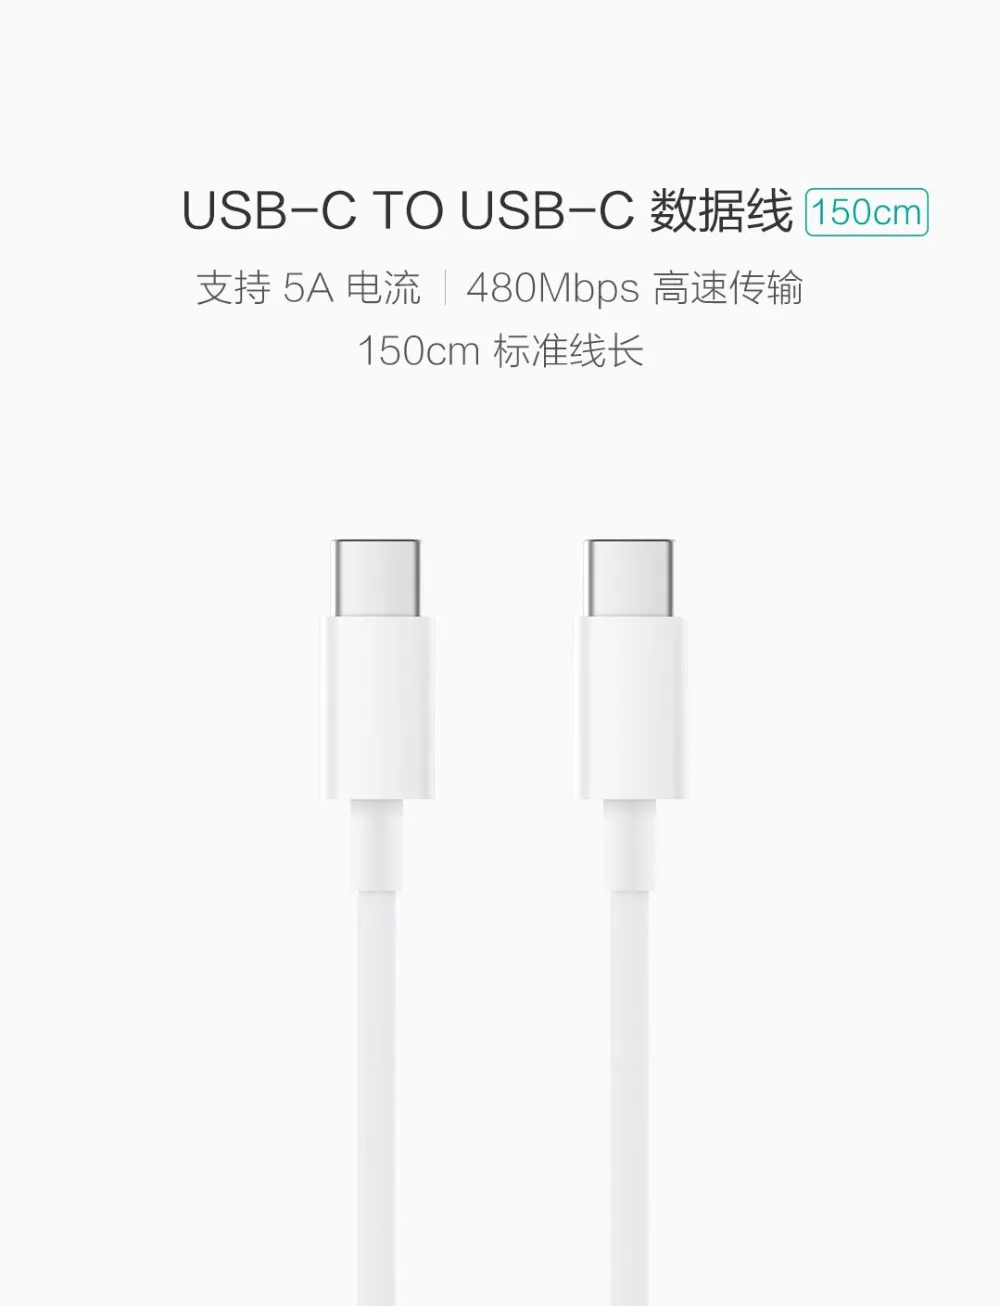 Original xiaomi notebook air usb type c to usb type c cable for apple macbook pro usb c cable fast charging for Samsung 9 huawei